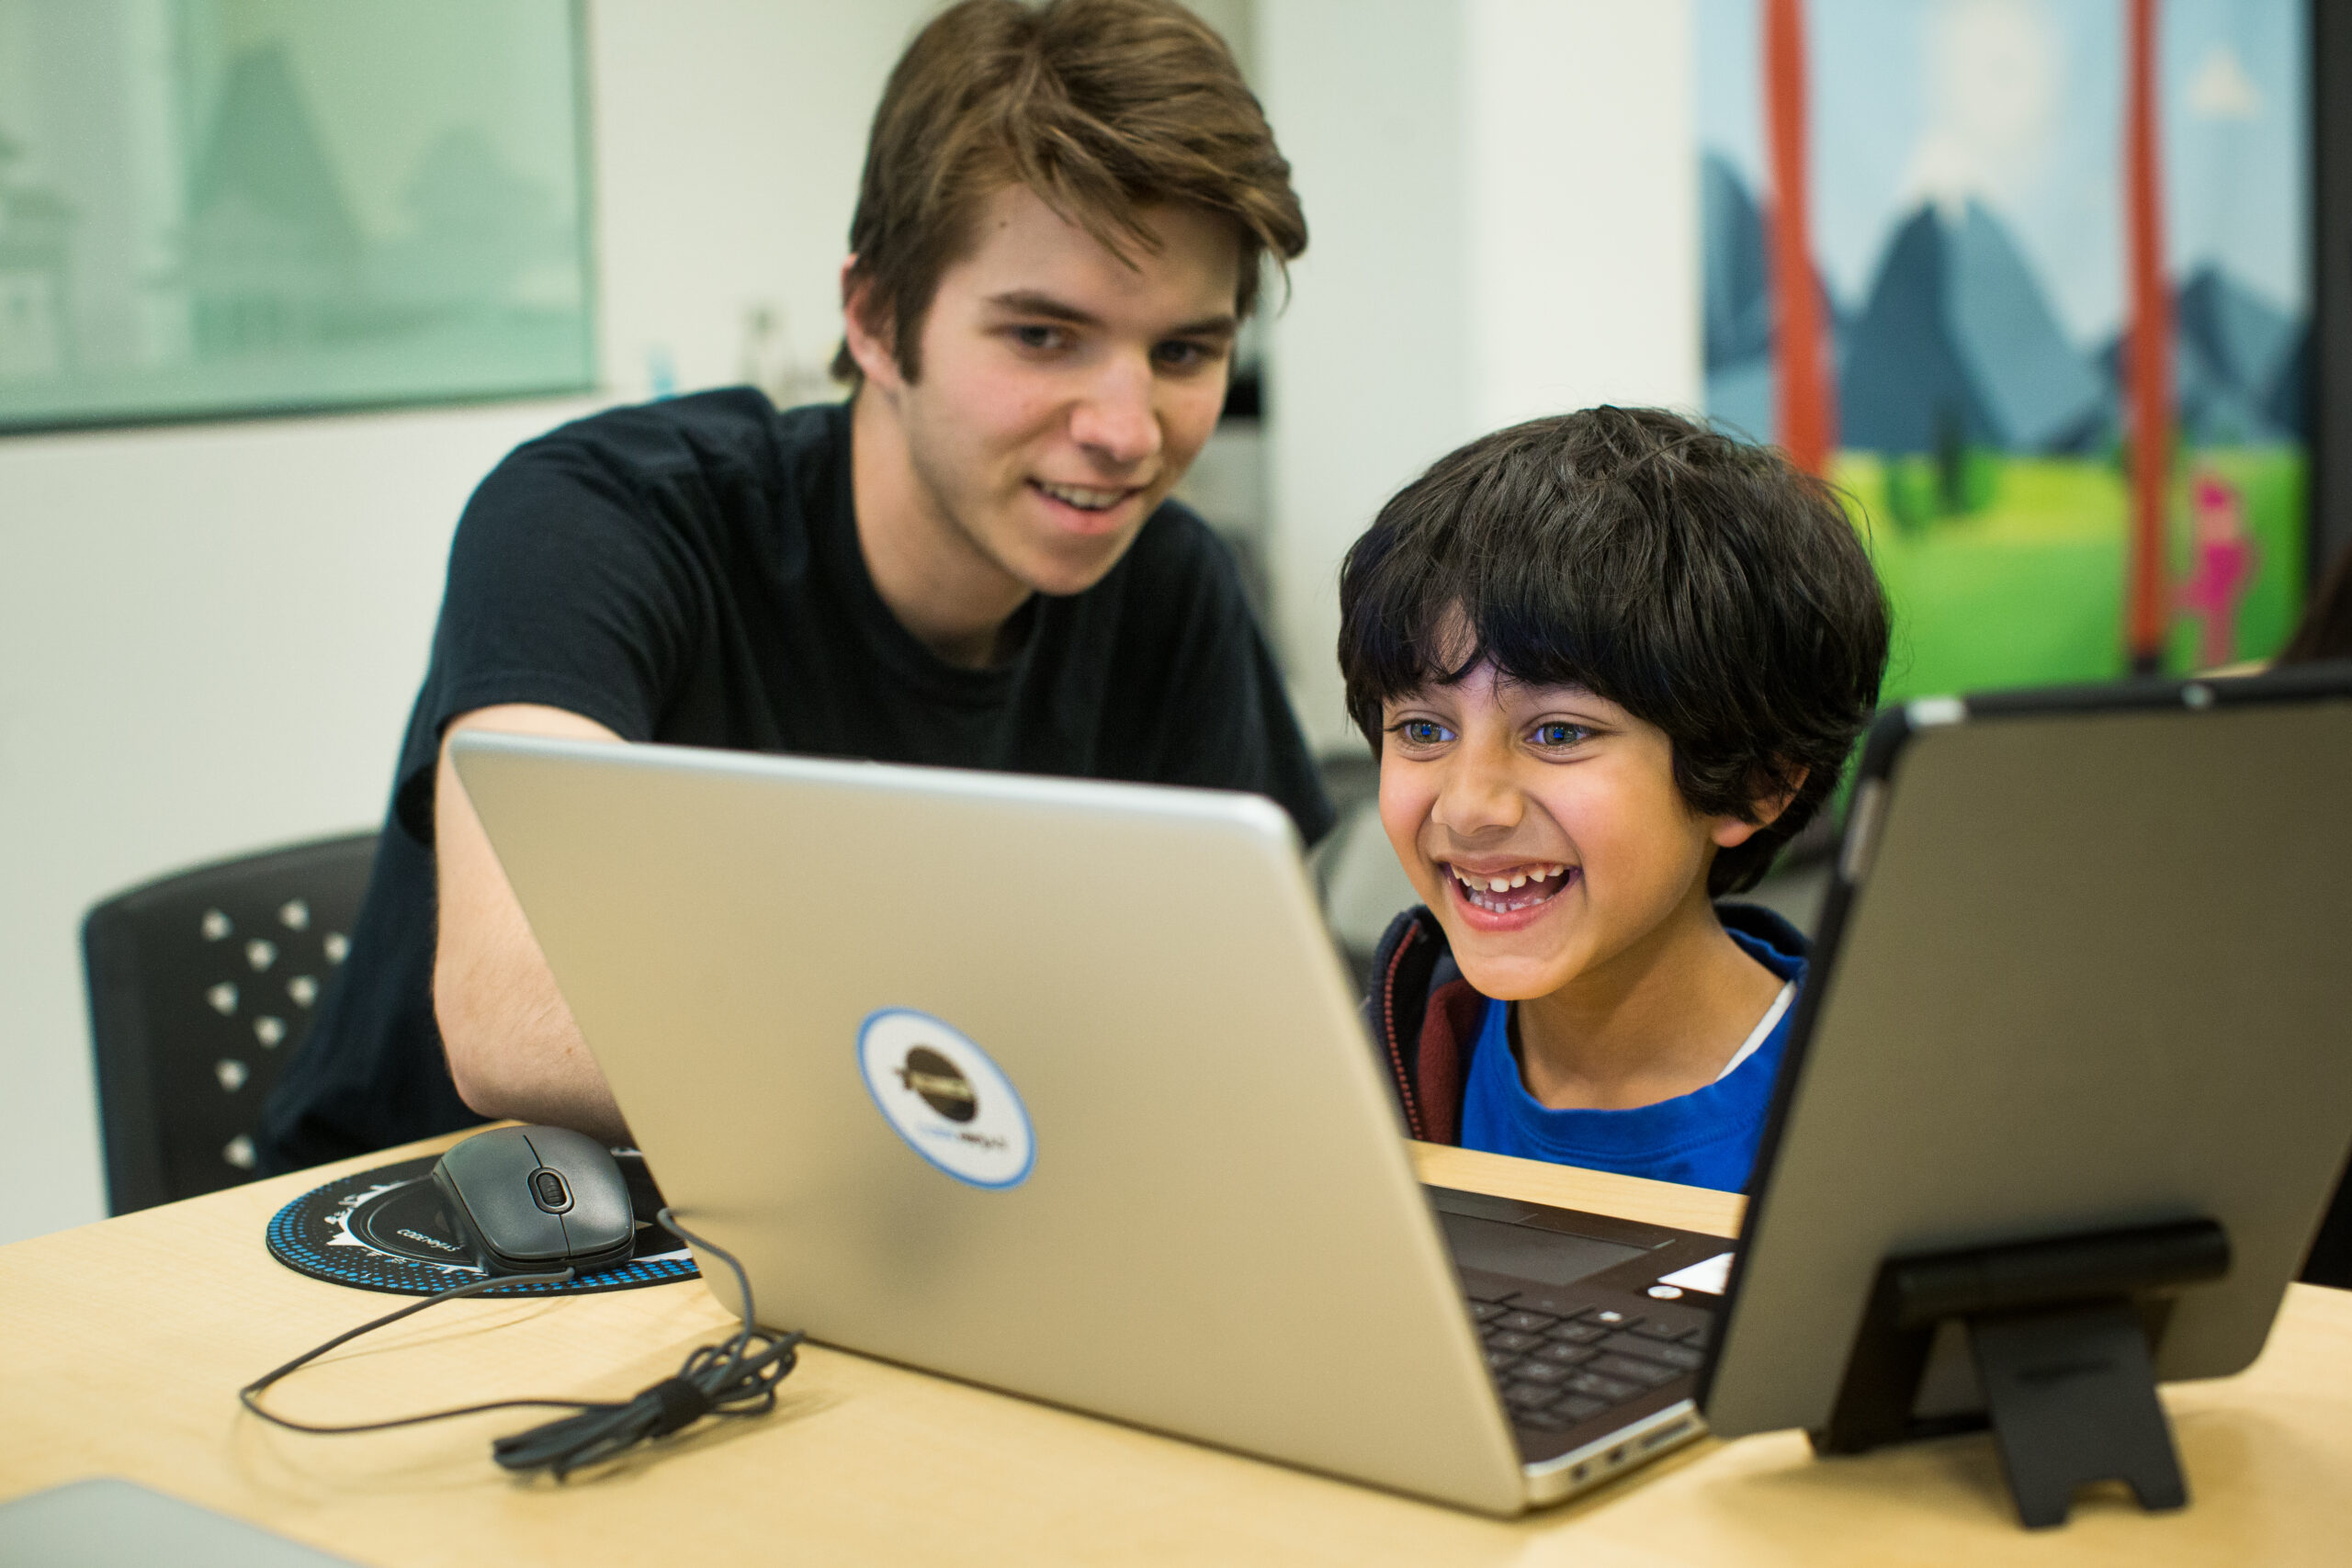 A young boy smiles into a laptop as a teenage mentor looks over his shoulder.